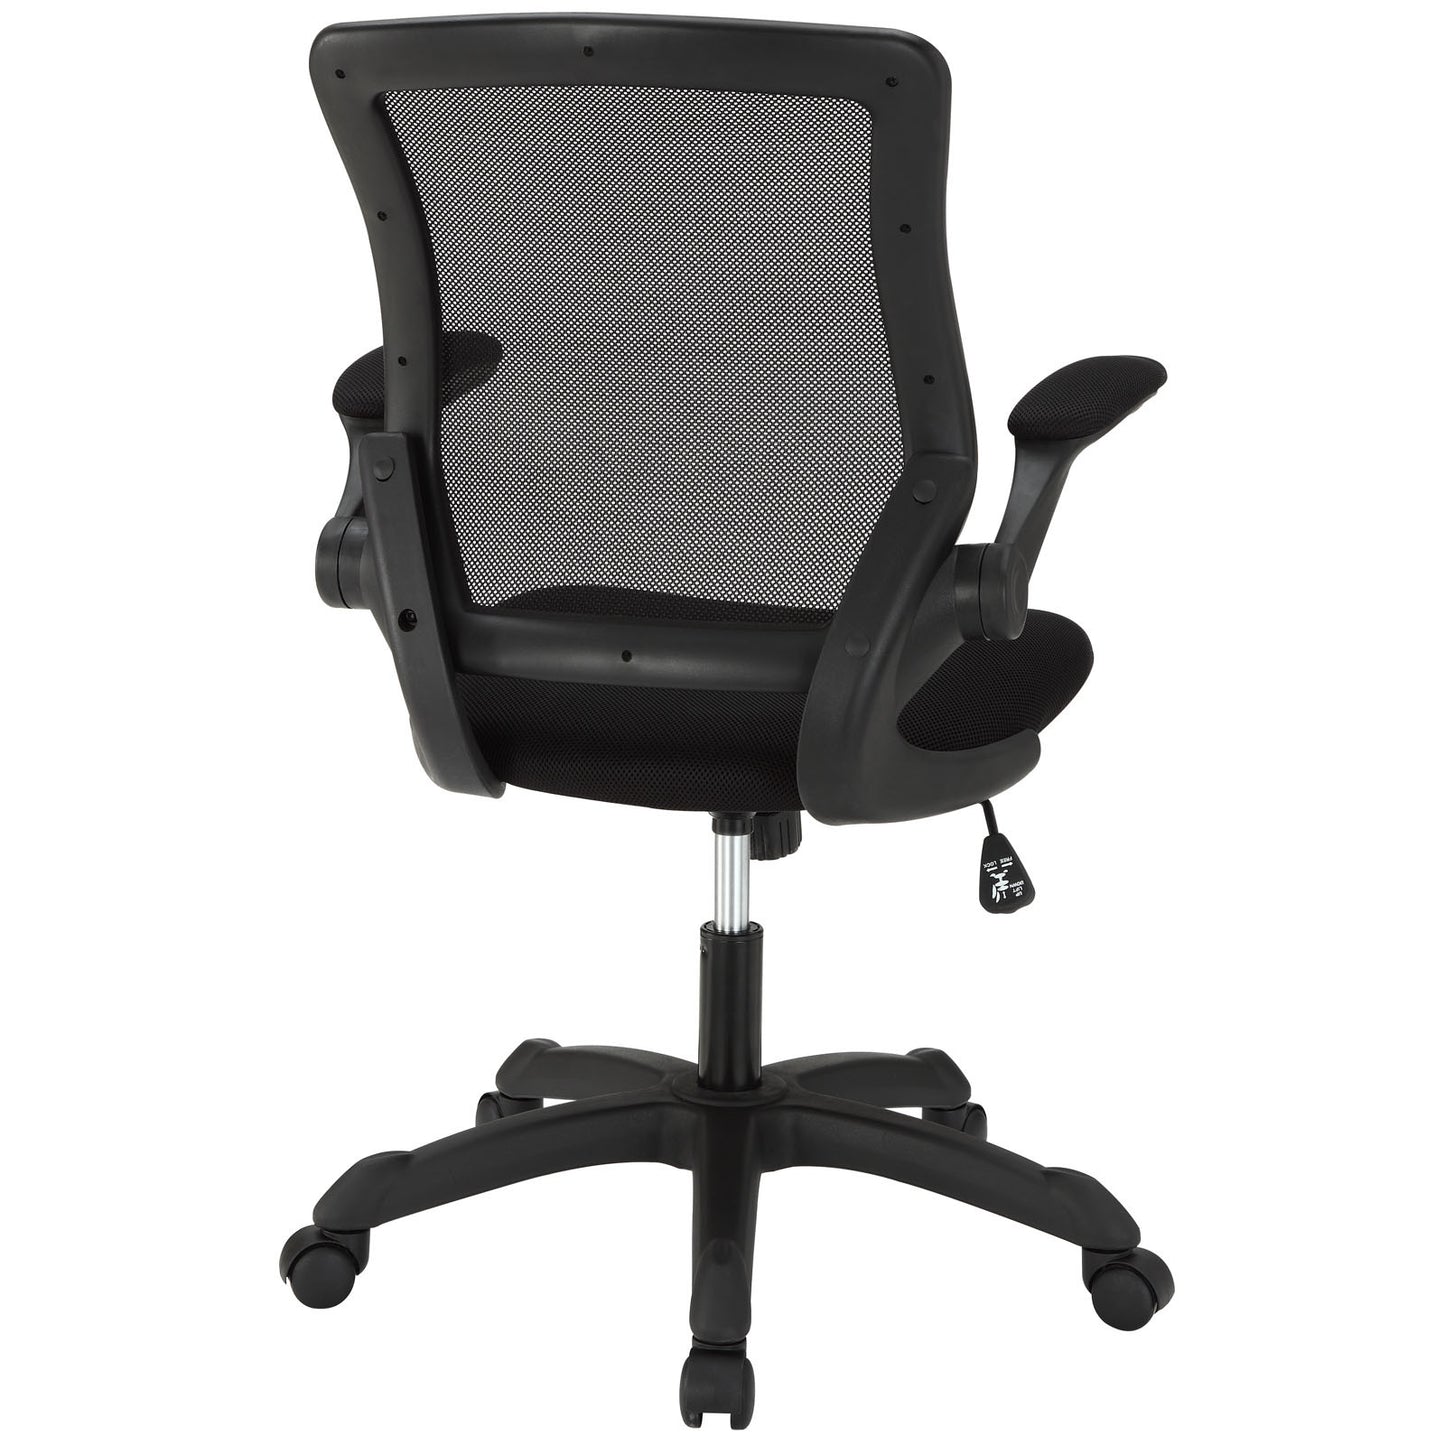 Diverge Office Chair - living-essentials